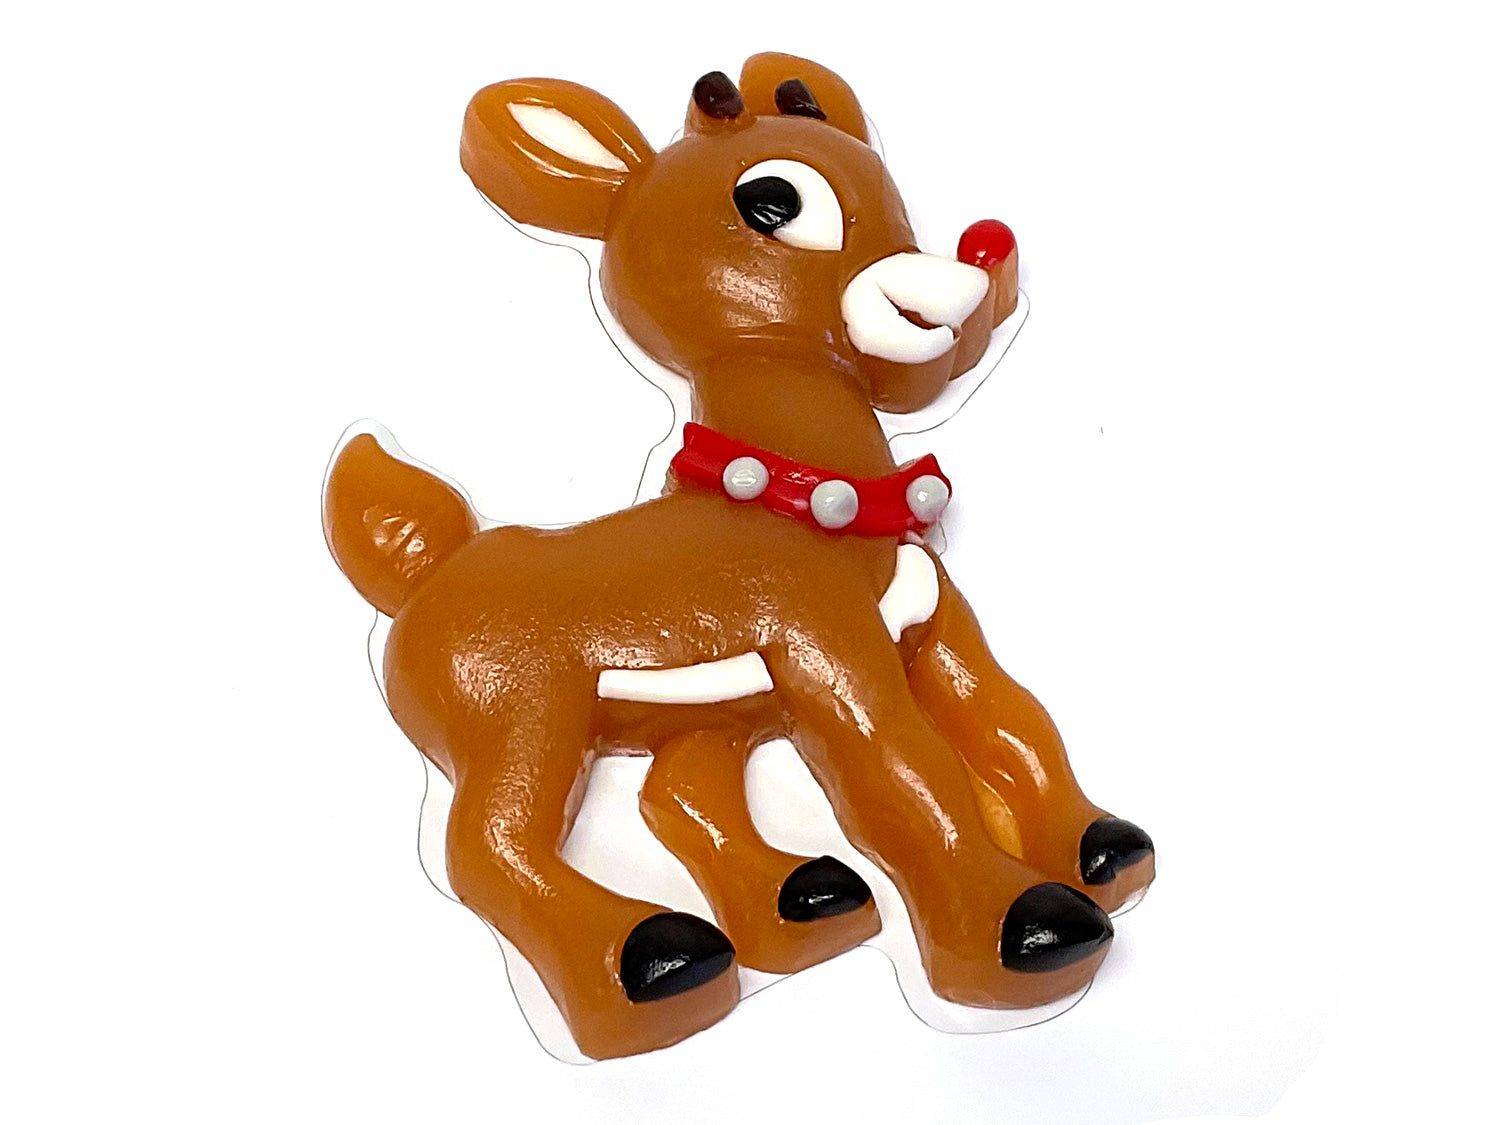 Rudolph the Red Nose Reindeer Gummies Theater Box 3 oz.